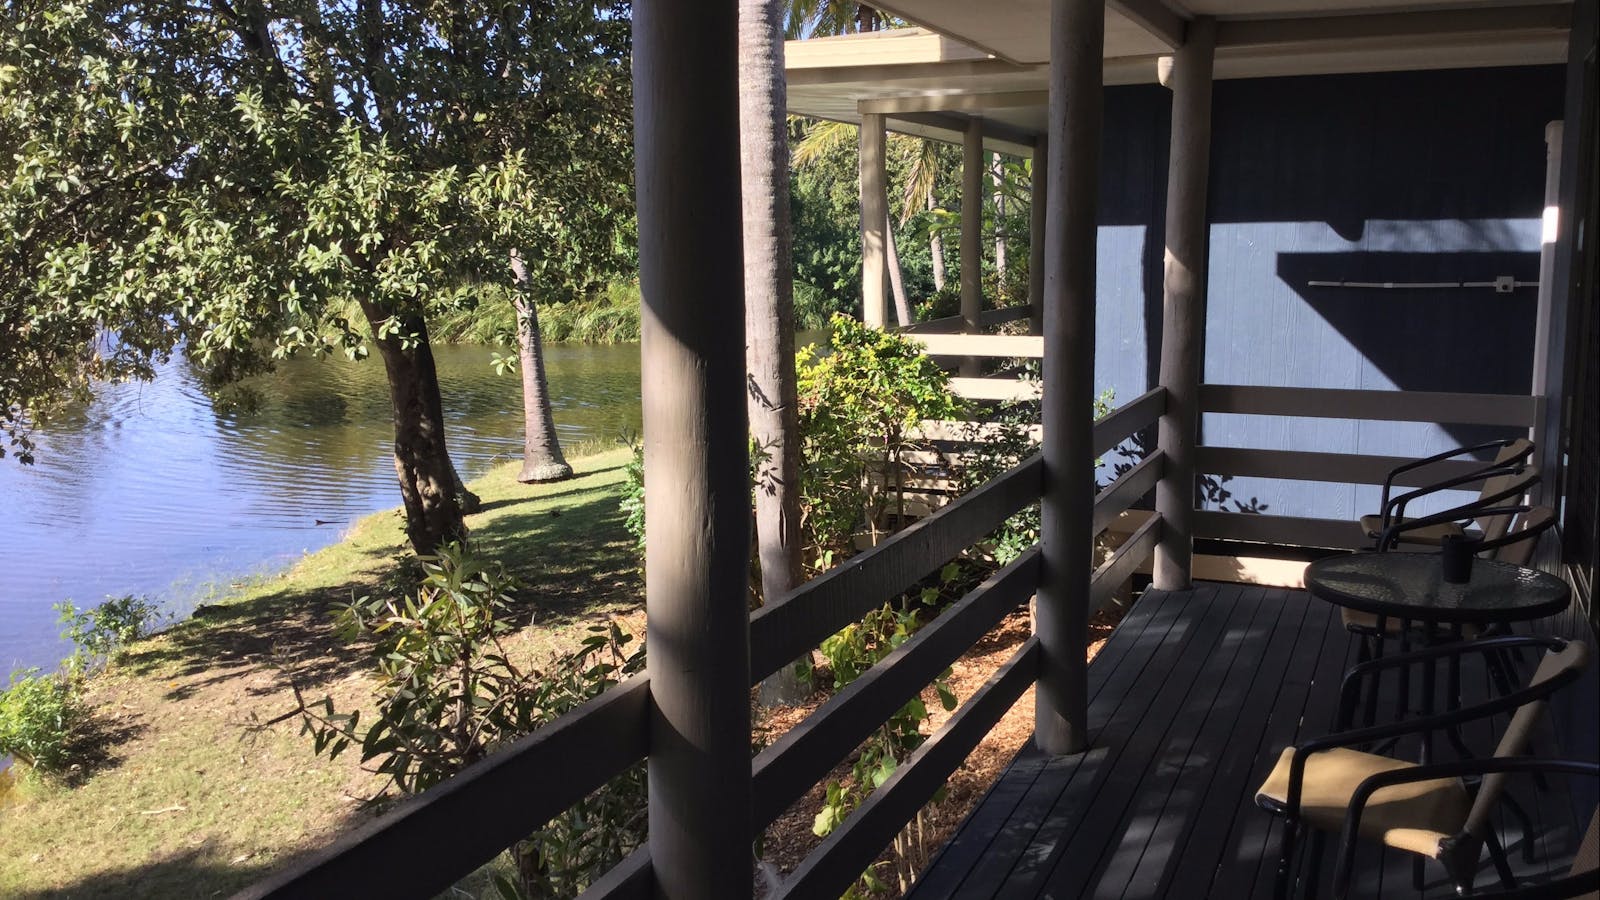 All villas at Sanctuary Lakes Fauna Retreat have a balcony looking over the lake